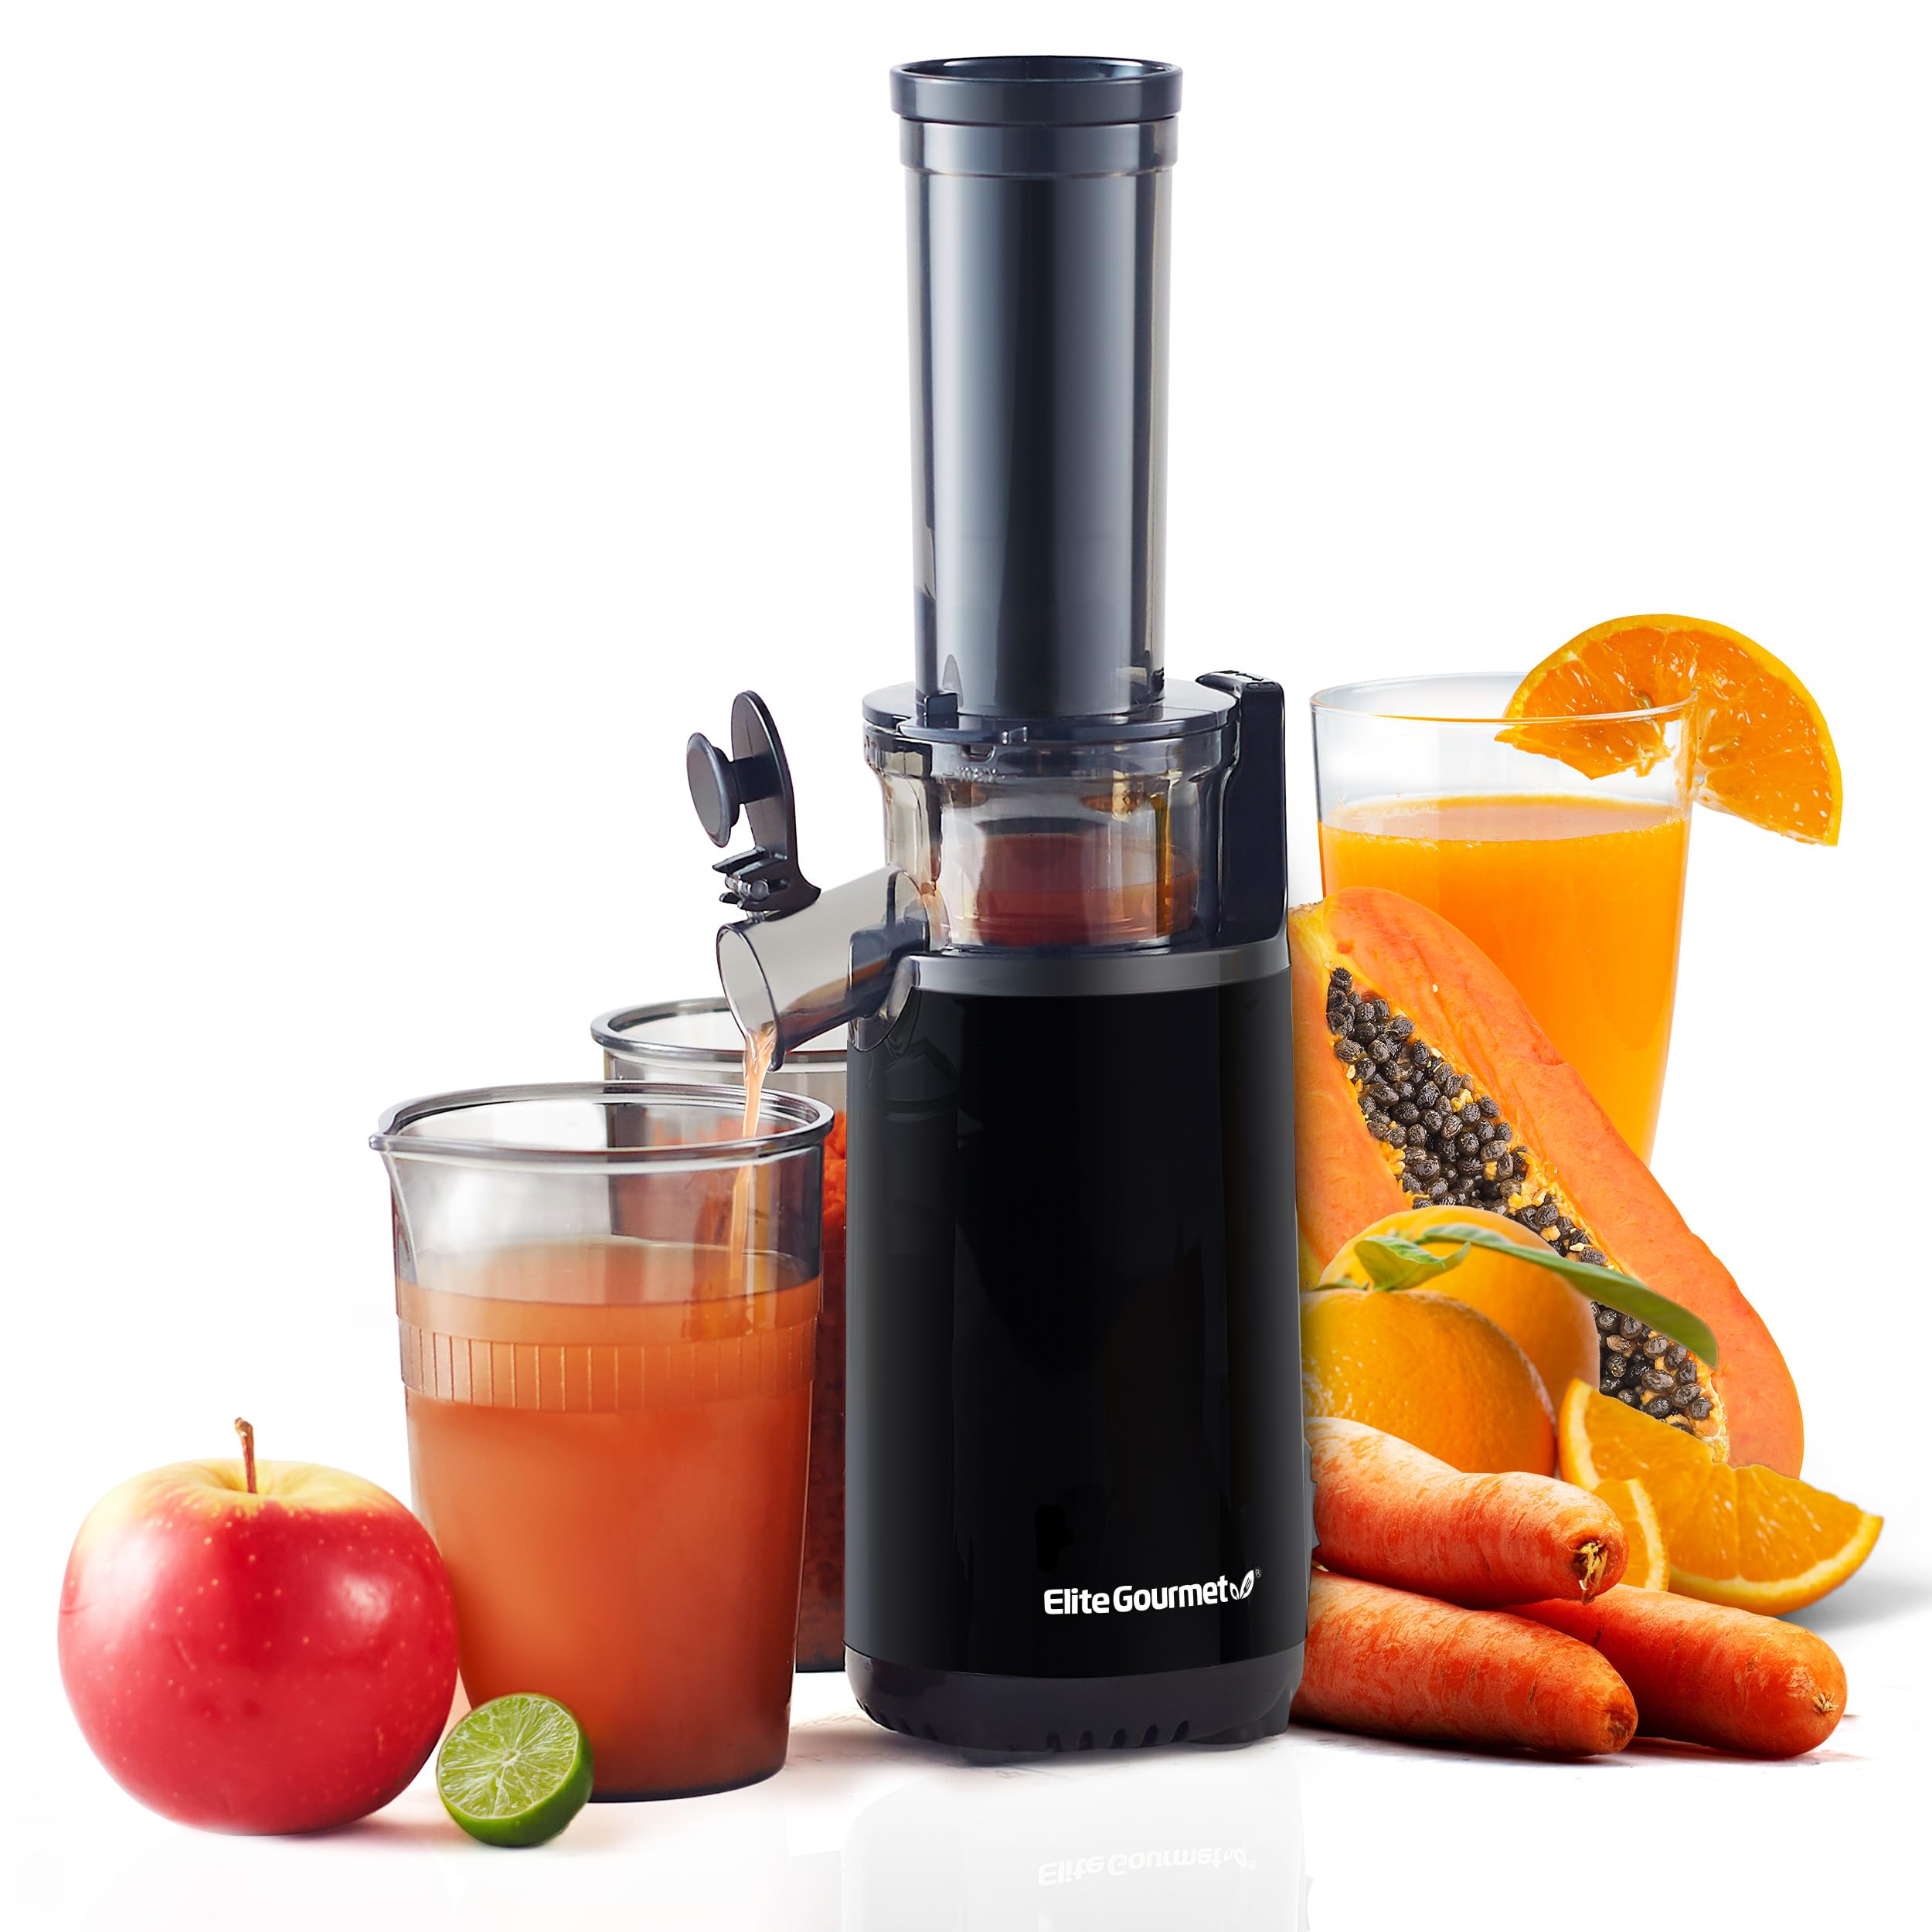 Elite Gourmet EJX600 Compact Small Space-Saving Masticating Slow Juicer, Cold Press Juice Extractor, Nutrient and Vitamin Dense, BPA-Free Tritan 16 oz, Charcoal Grey $34.49